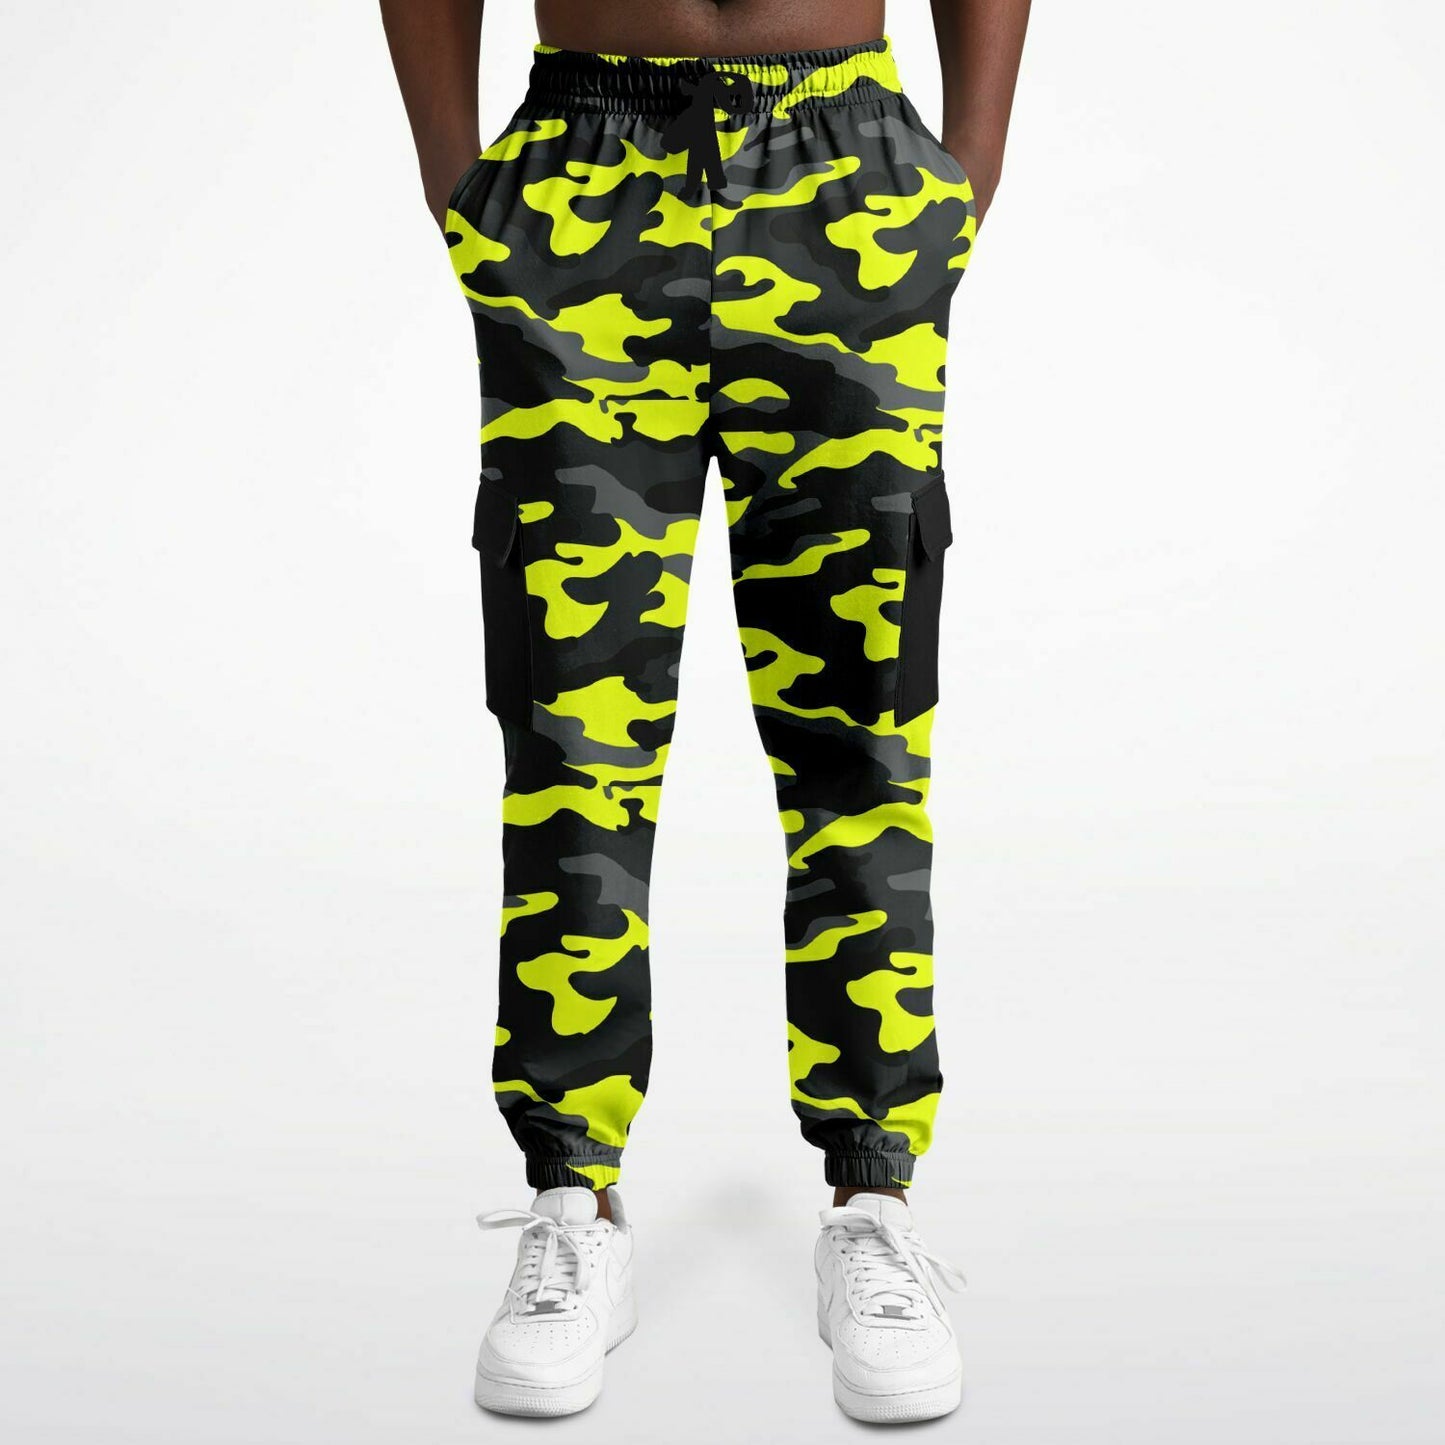 (A) Yellow Camouflage Sweatpants